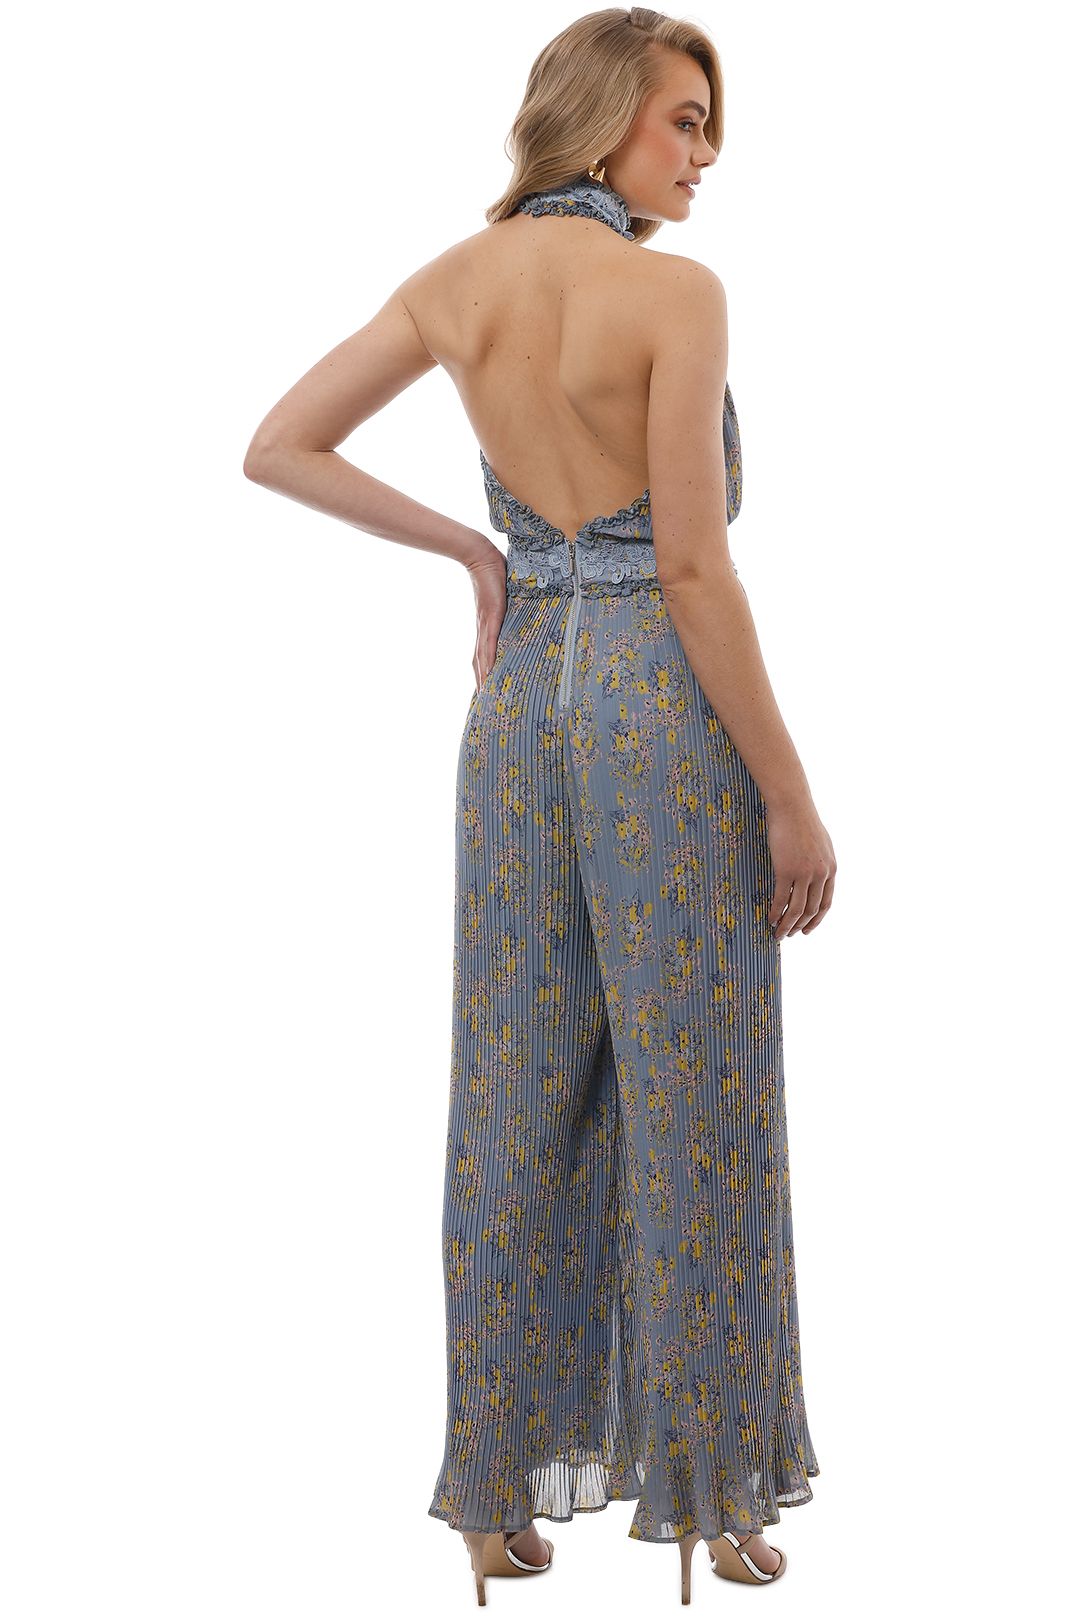 We Are Kindred - Helena Pleated Jumpsuit - Blue Floral - Back